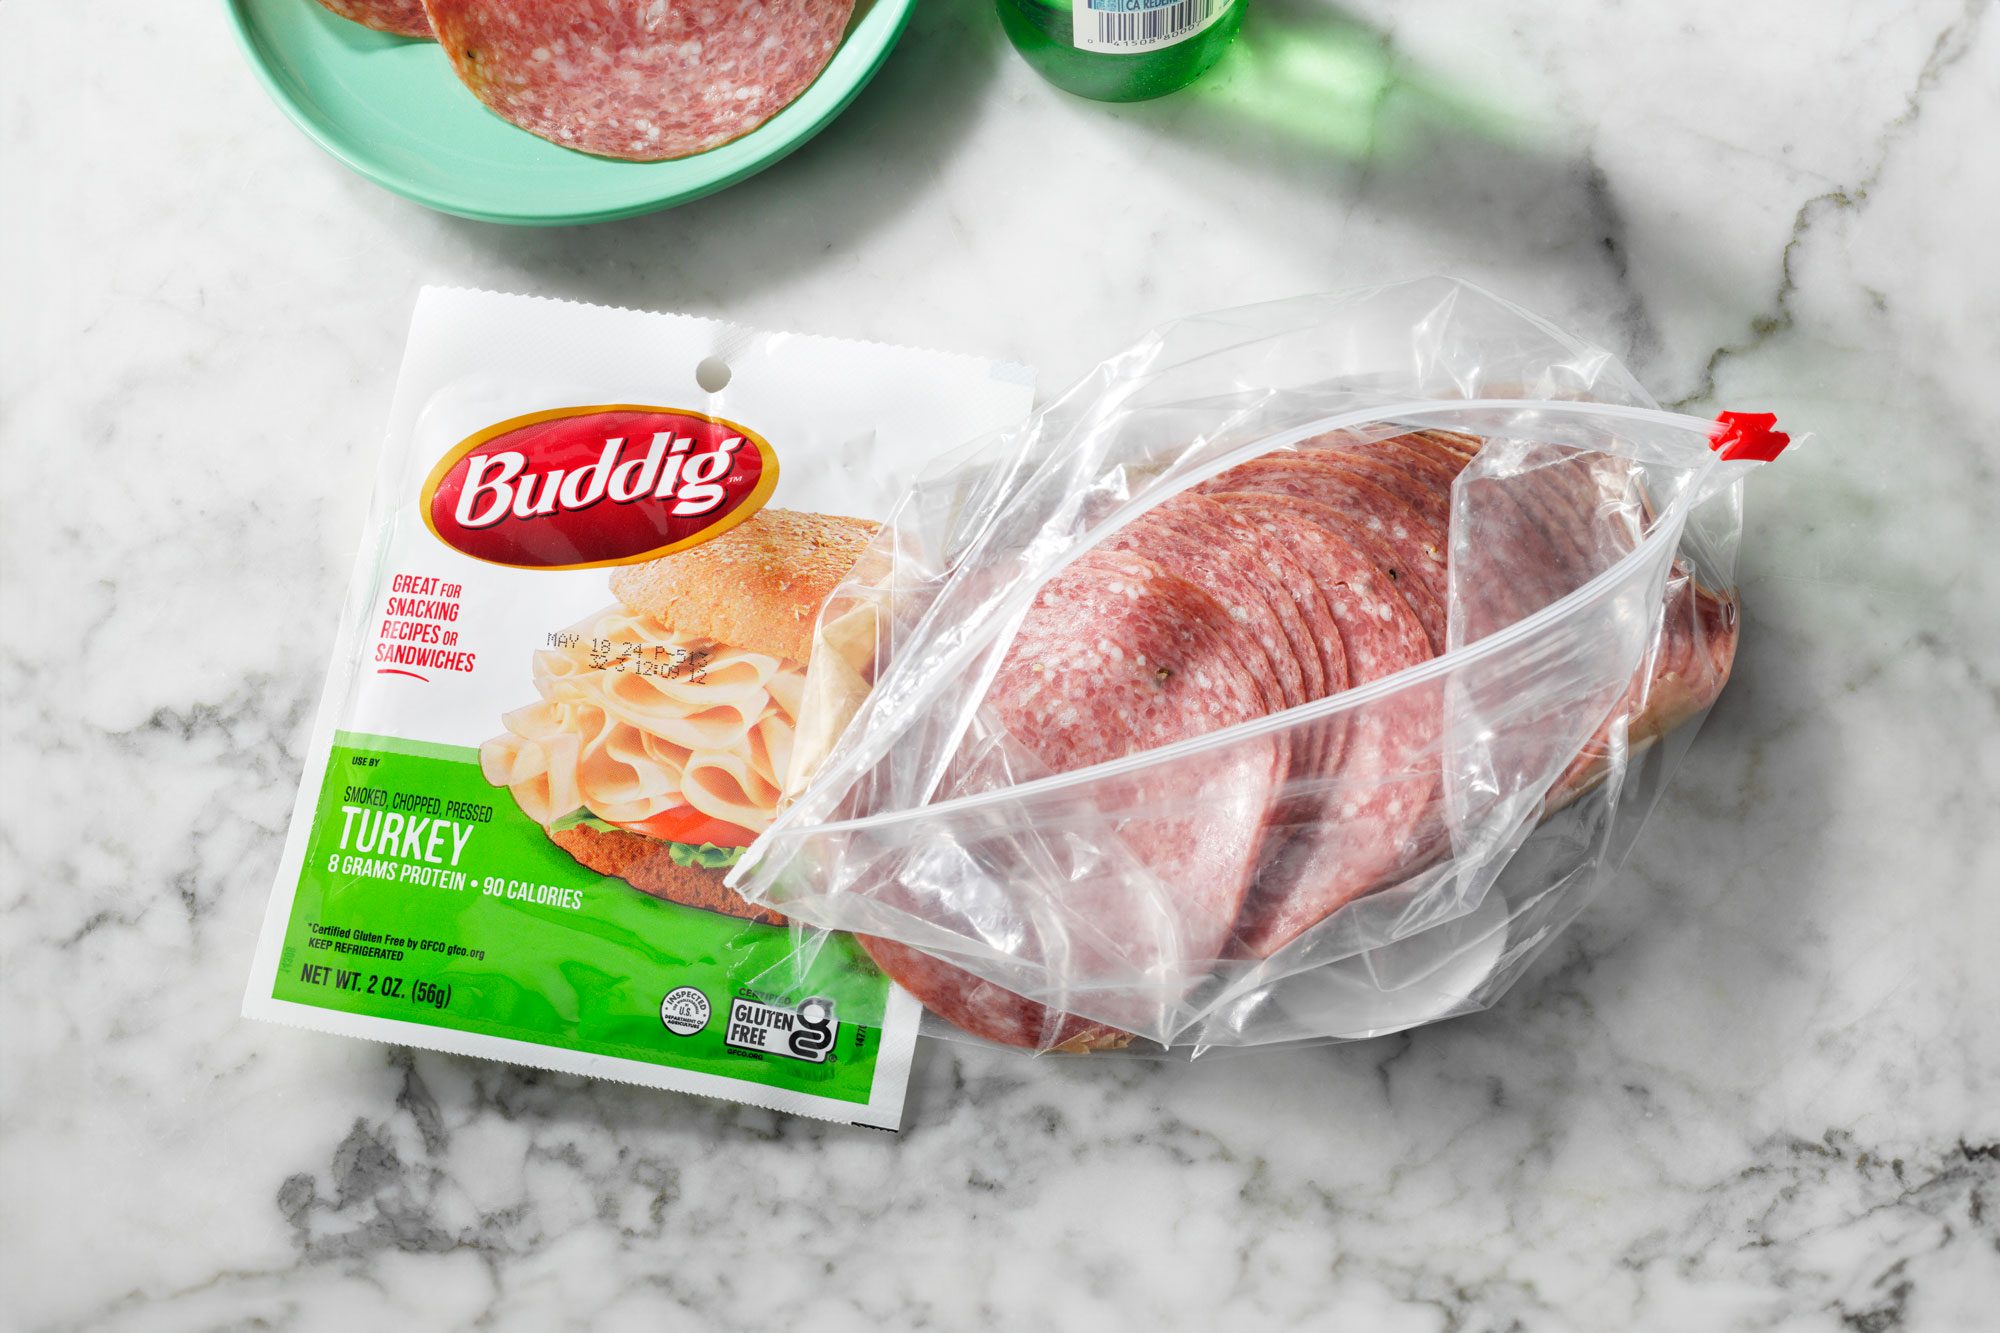 Pre-packaged and deli counter lunch meat packages on a marble countertop